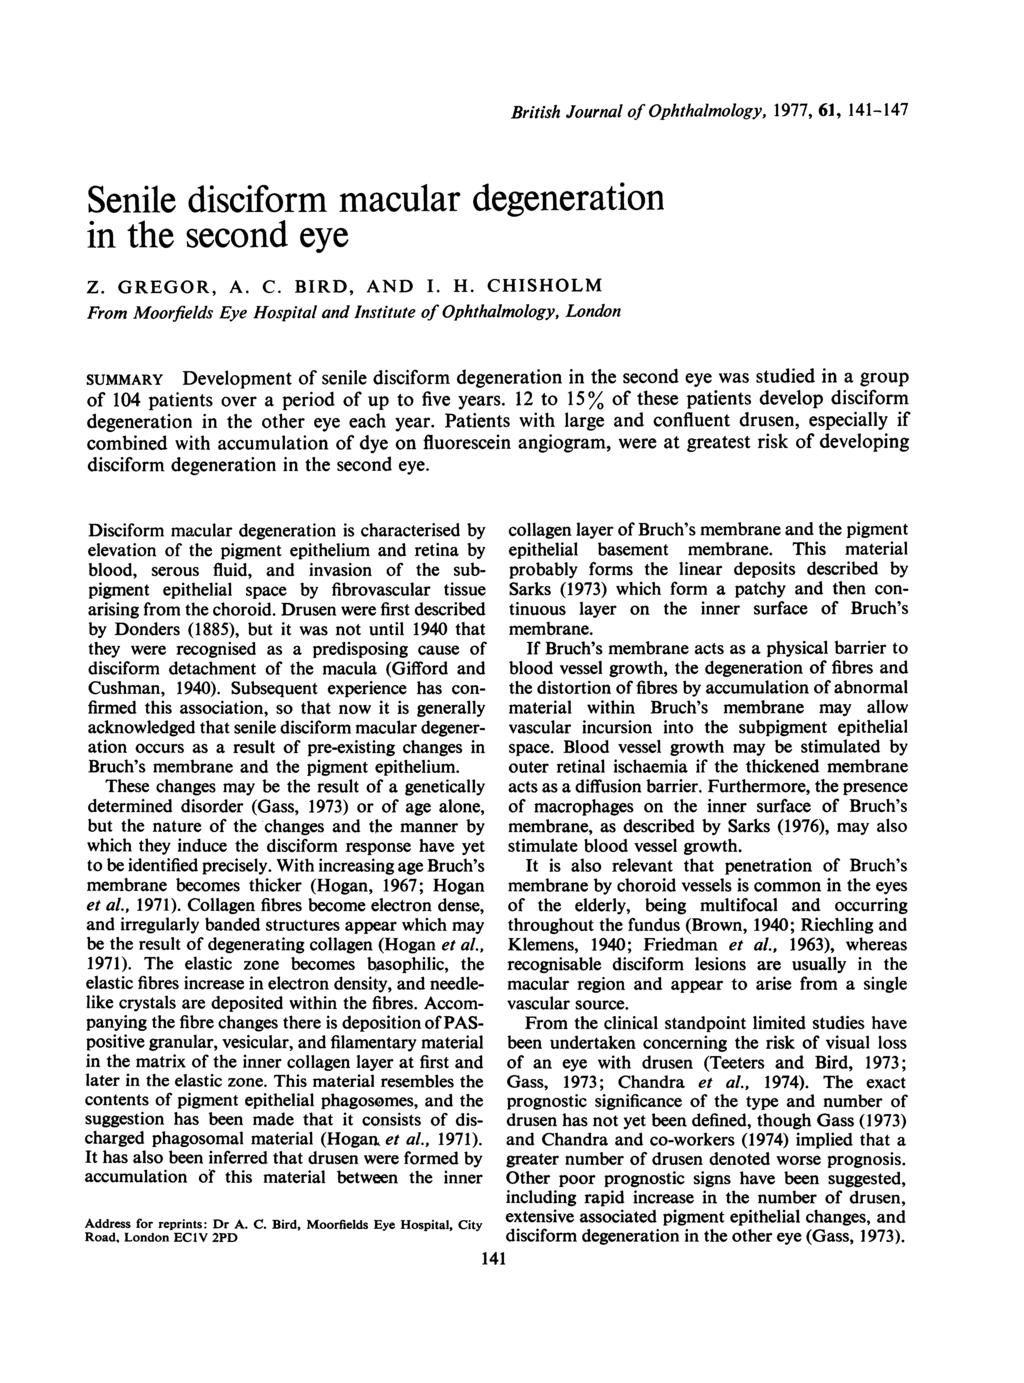 British Journal of Ophthalmology, 1977, 61, 141-147 Senile disciform macular degeneration in the second eye Z. GREGOR, A. C. BIRD, AND I. H.